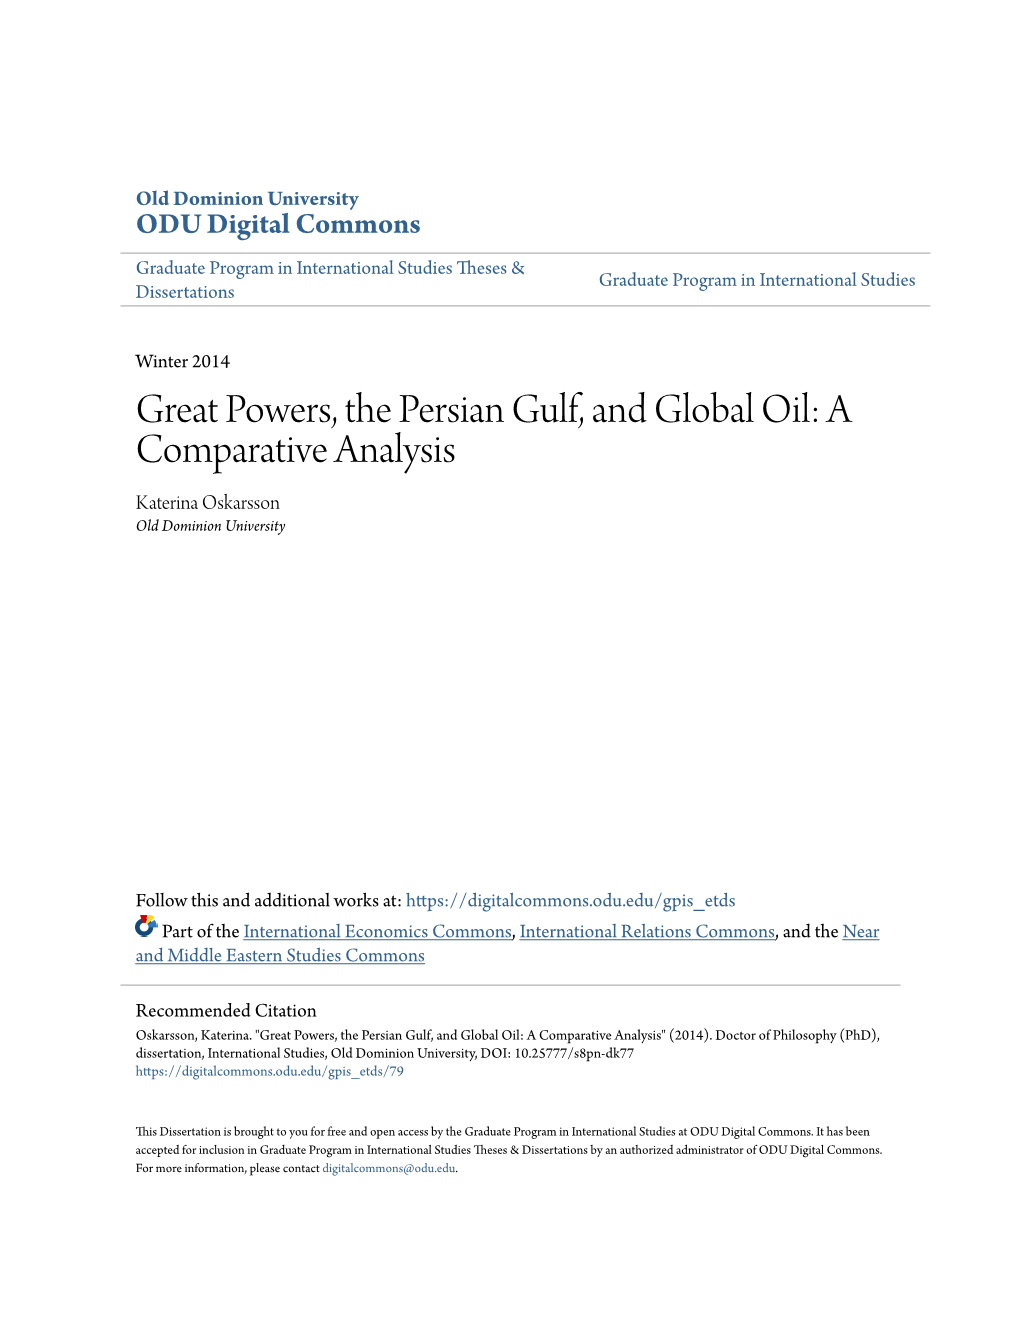 Great Powers, the Persian Gulf, and Global Oil: a Comparative Analysis Katerina Oskarsson Old Dominion University